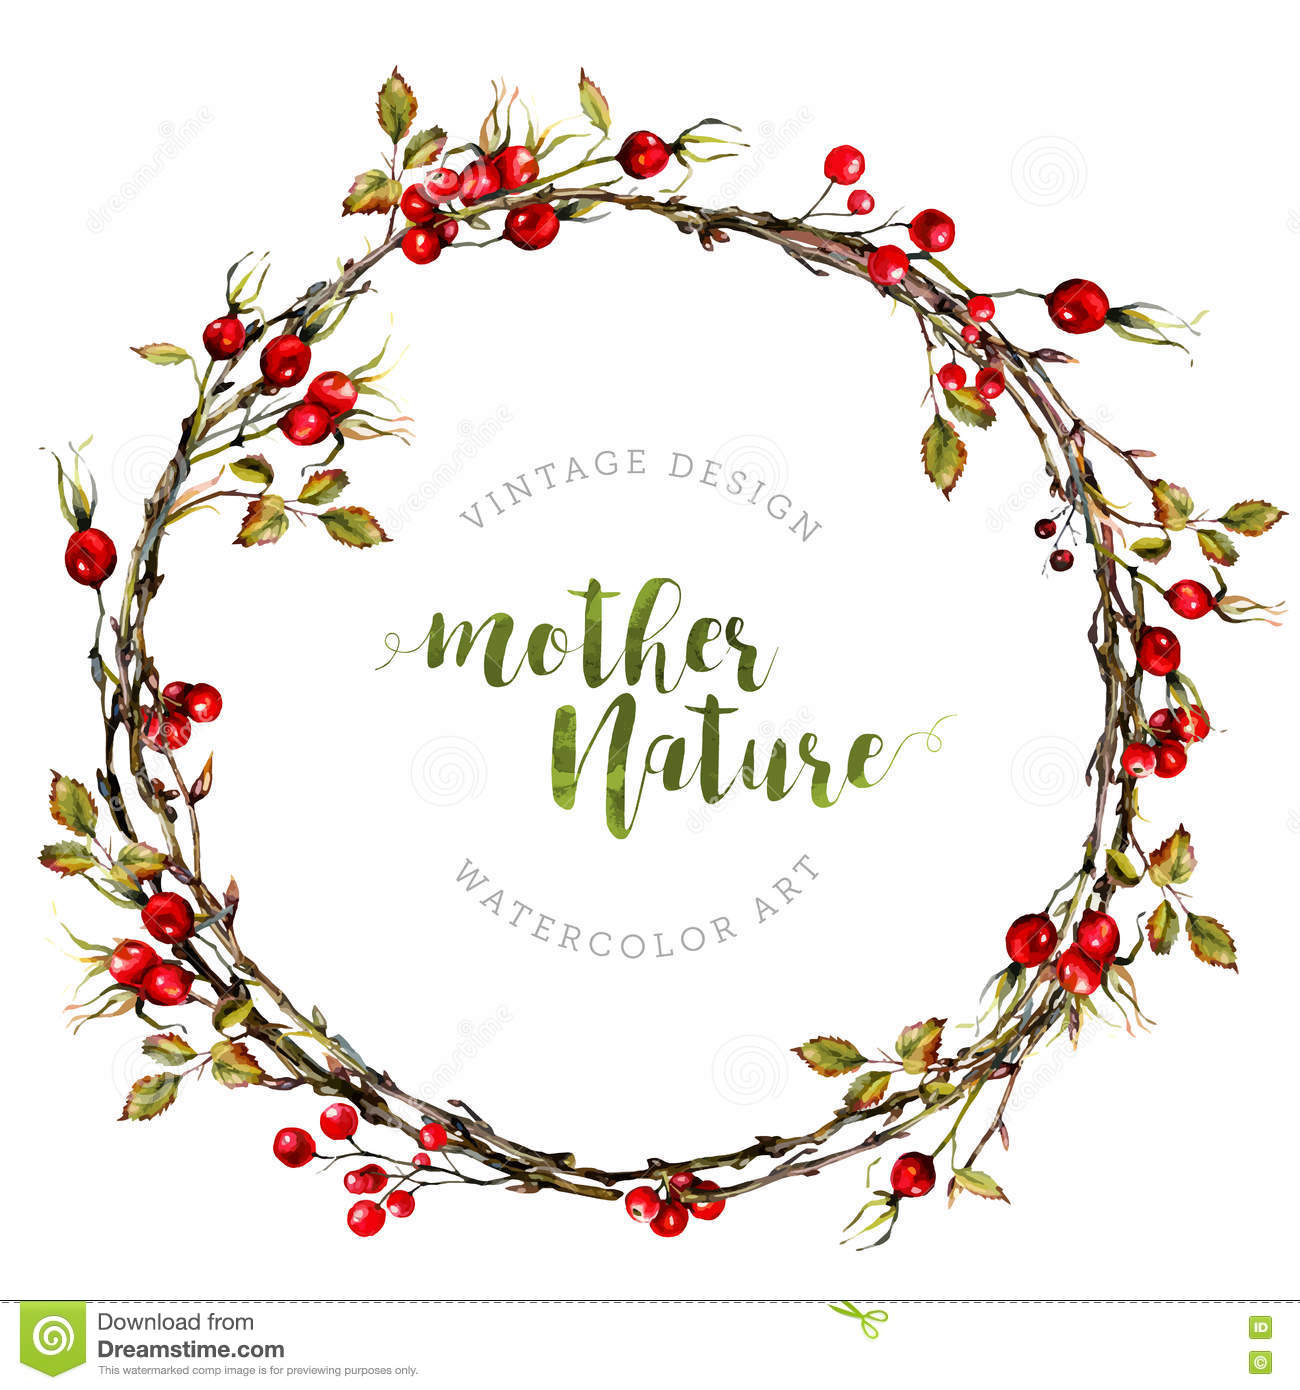 Watercolor Boho Wreath Made Of Dry Twigs Stock Vector.